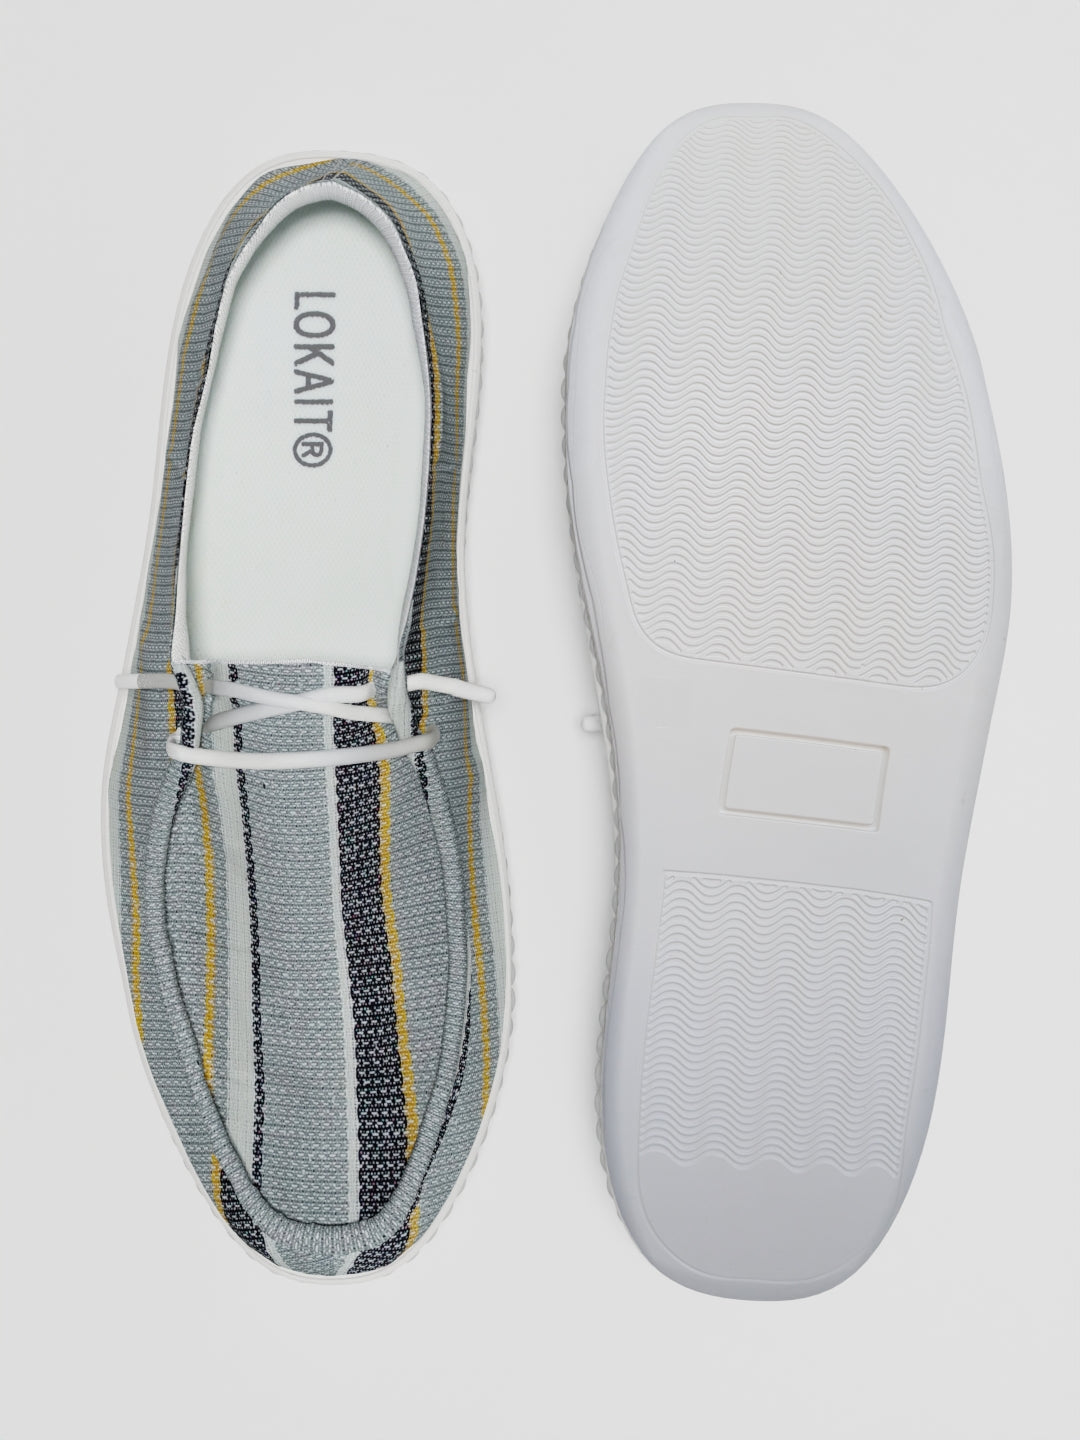 The Luna Grey Woven [Limited Edition]